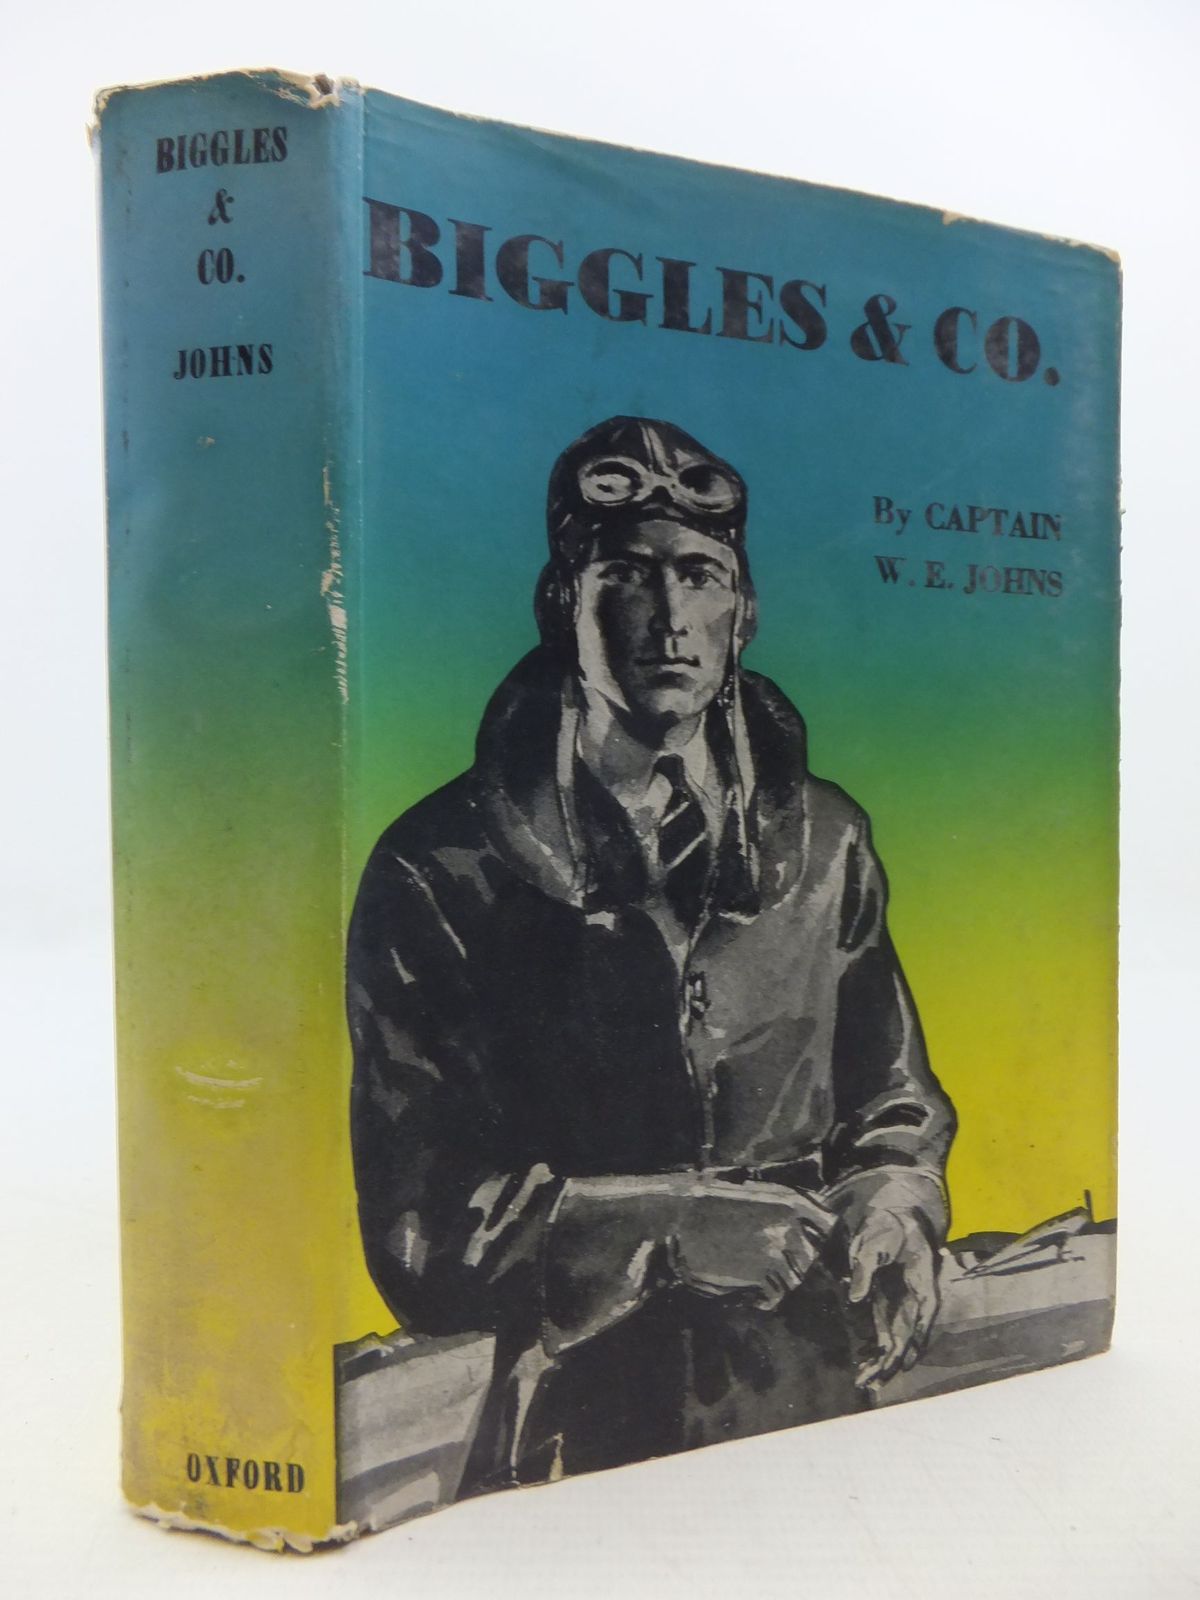 Cover of BIGGLES & CO. by W.E. Johns